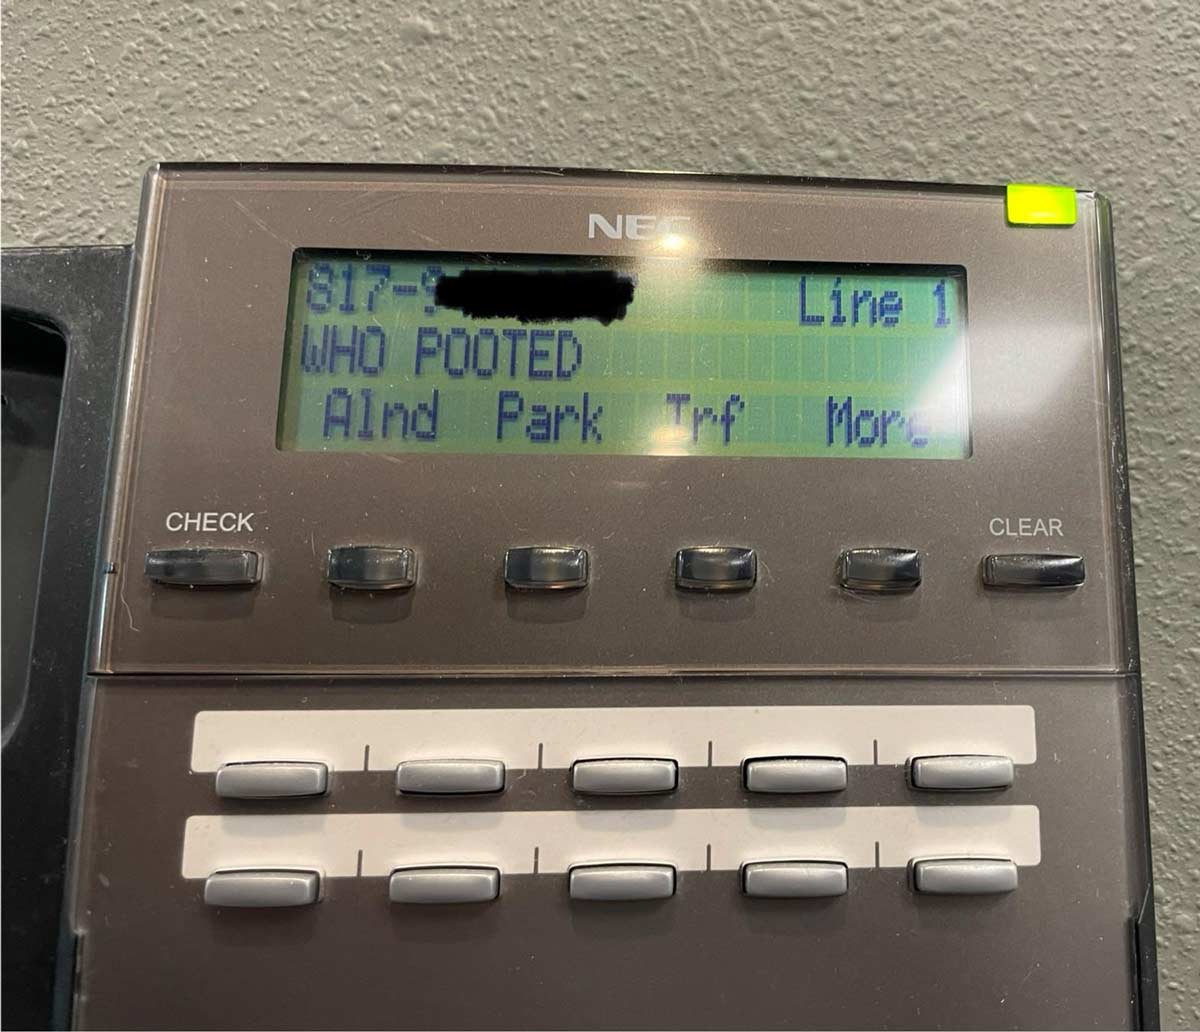 Received this call at work today